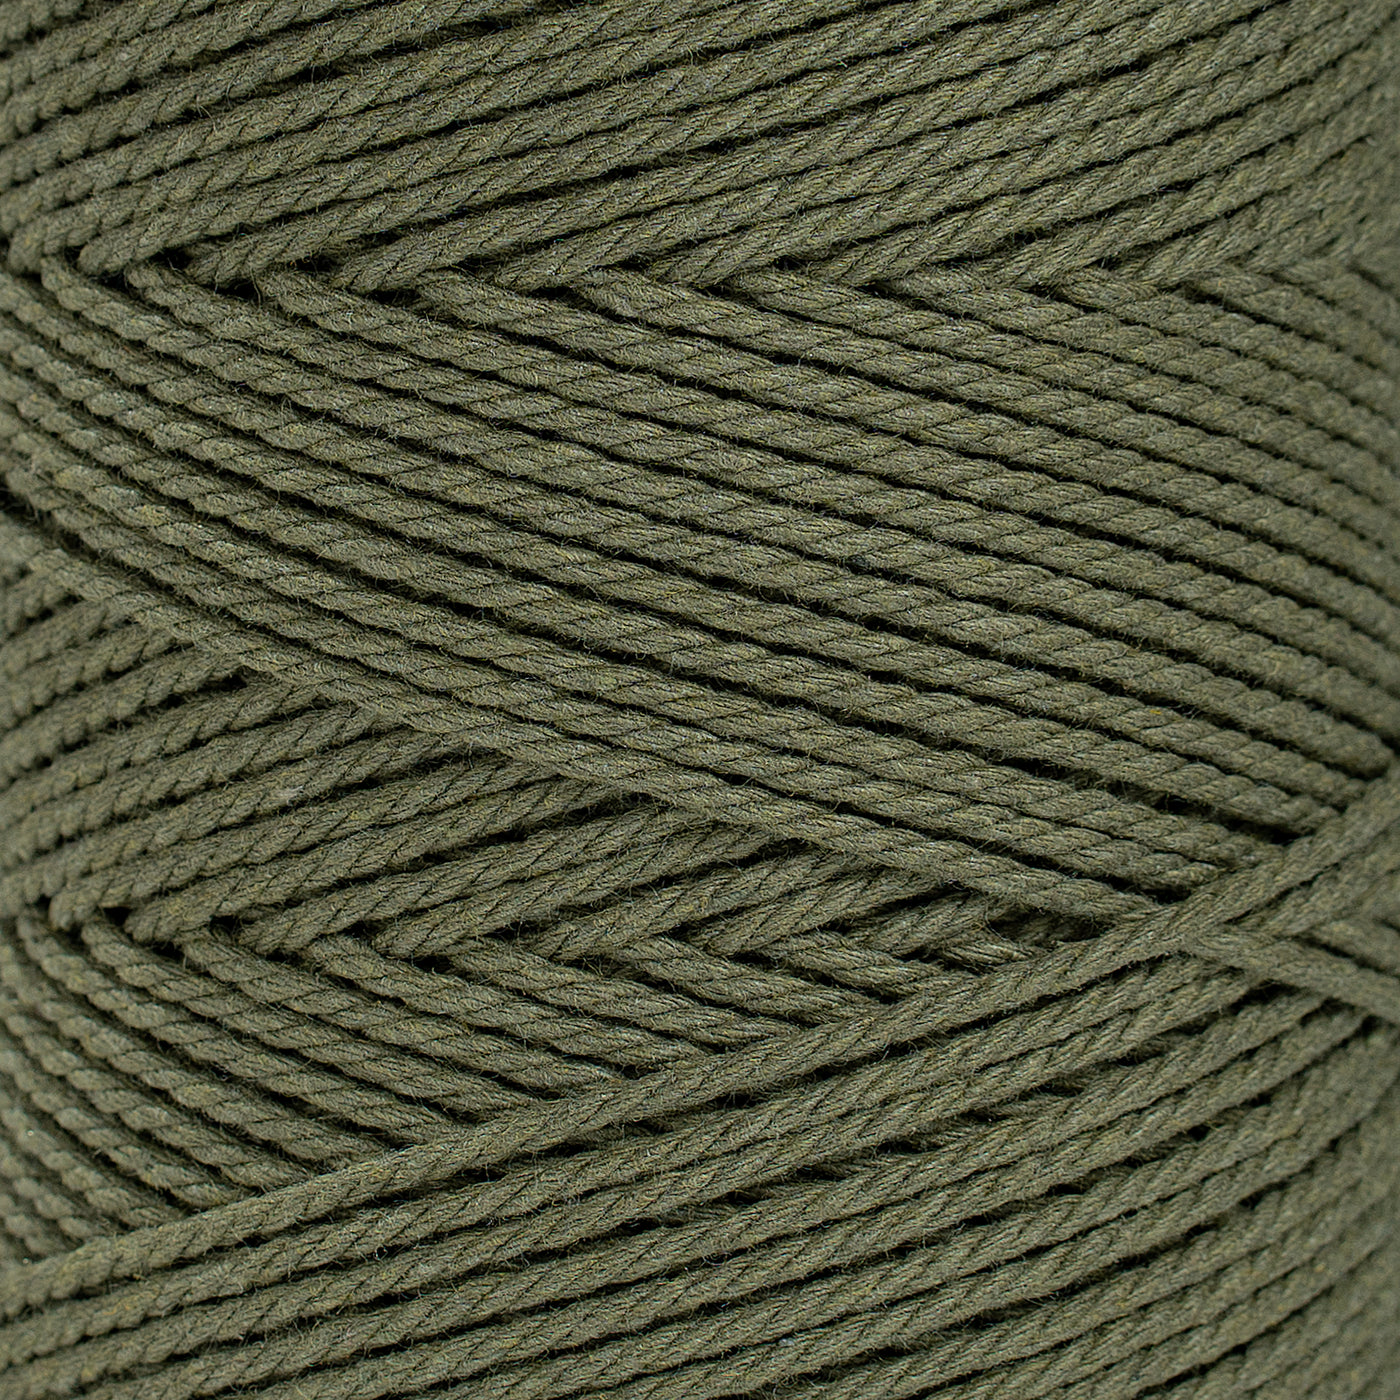 COTTON ROPE ZERO WASTE 2 MM - 3 PLY - MOSS GREEN COLOR